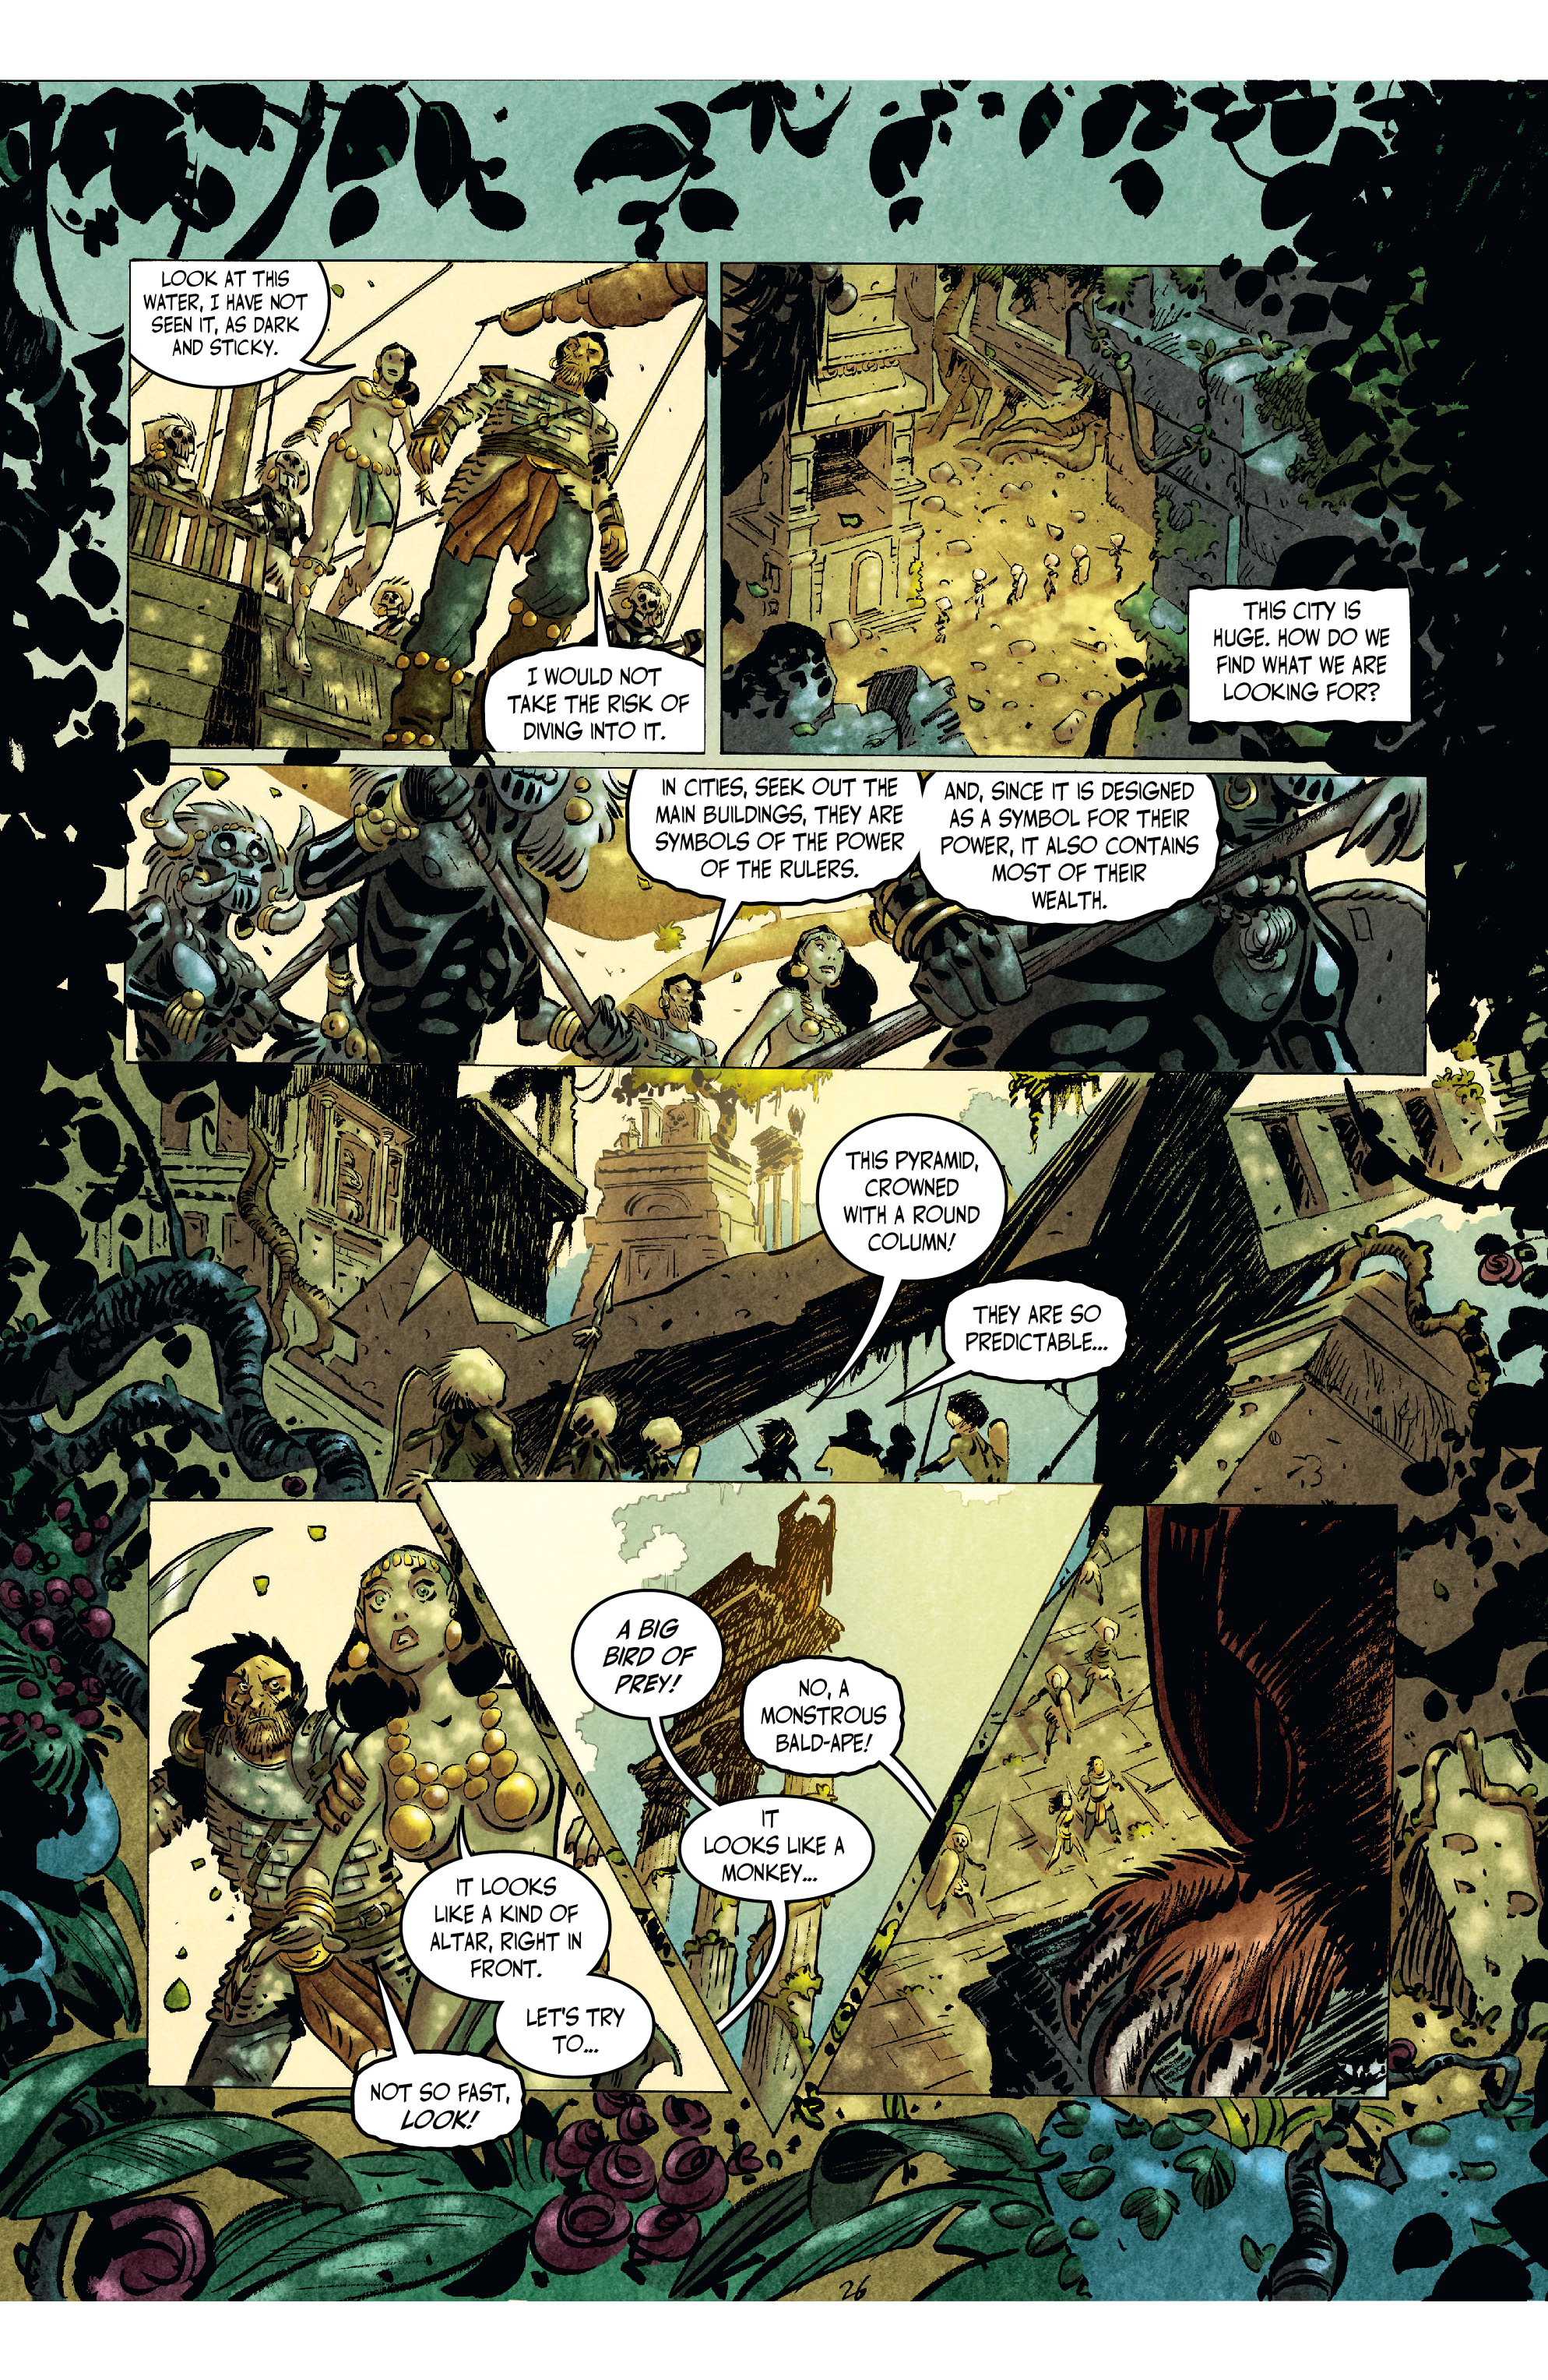 The Cimmerian: Queen of the Black Coast (2020-): Chapter 2 - Page 4